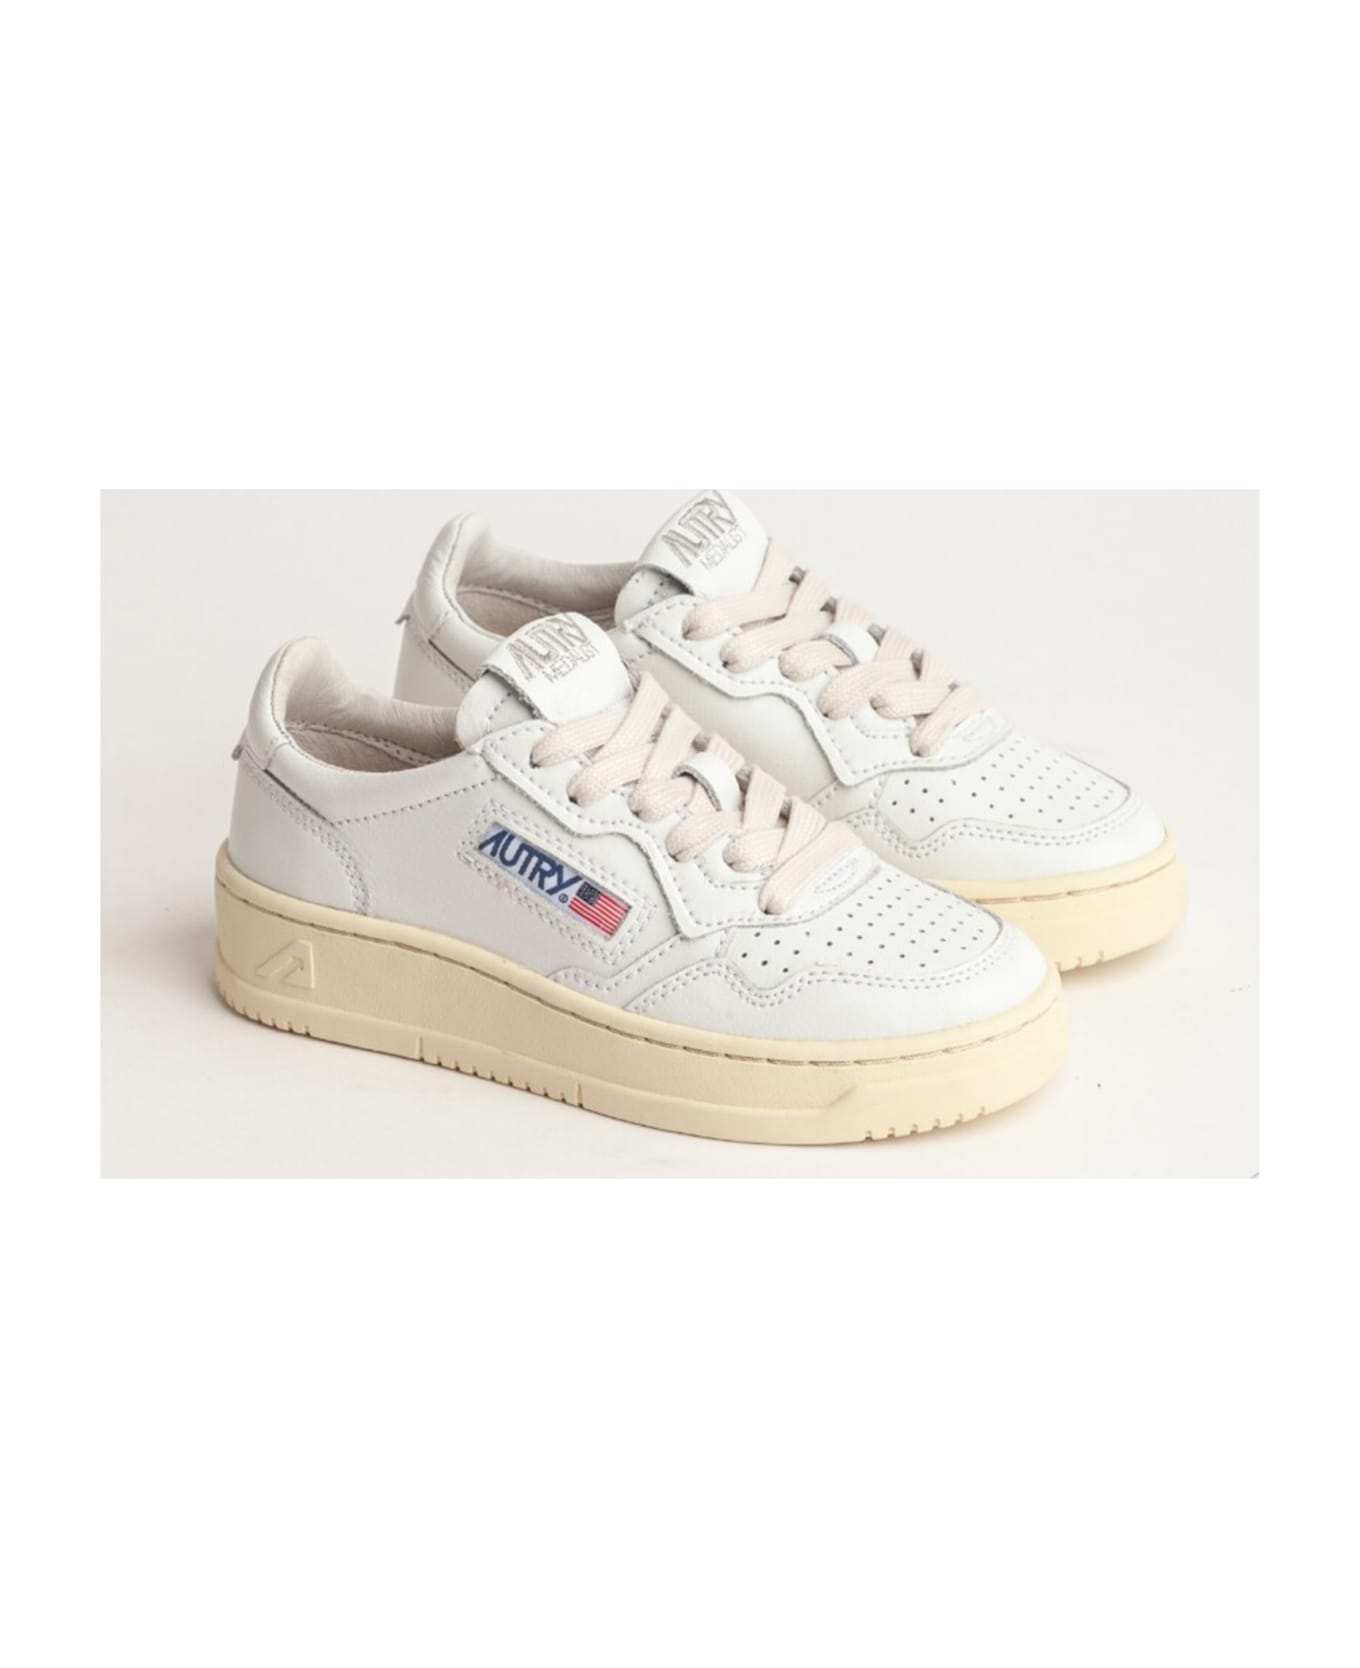 Autry Low Top Sneakers - WHITE